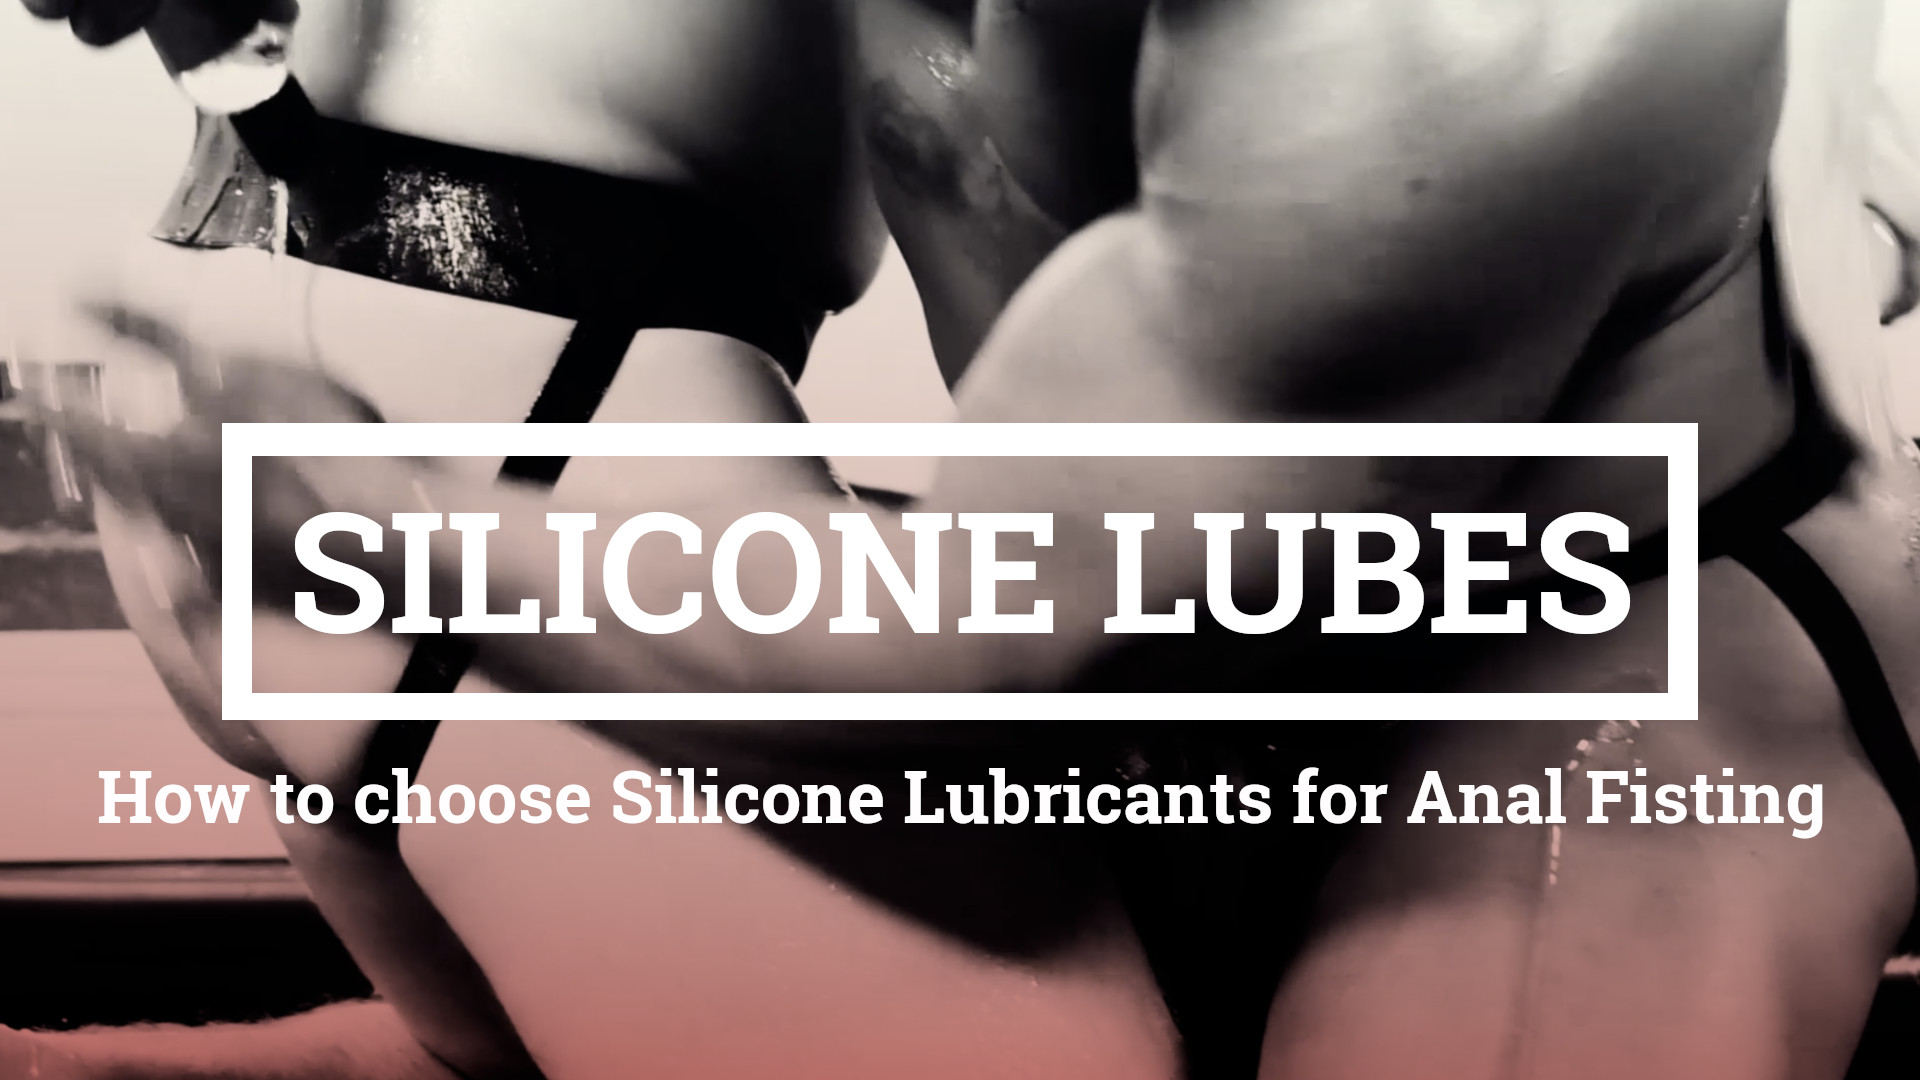 Silicone Lube for Anal Fisting – How to choose Silicone Based Lubricants for Anal Fisting – We compare different Silicone Lubes for Fisting use